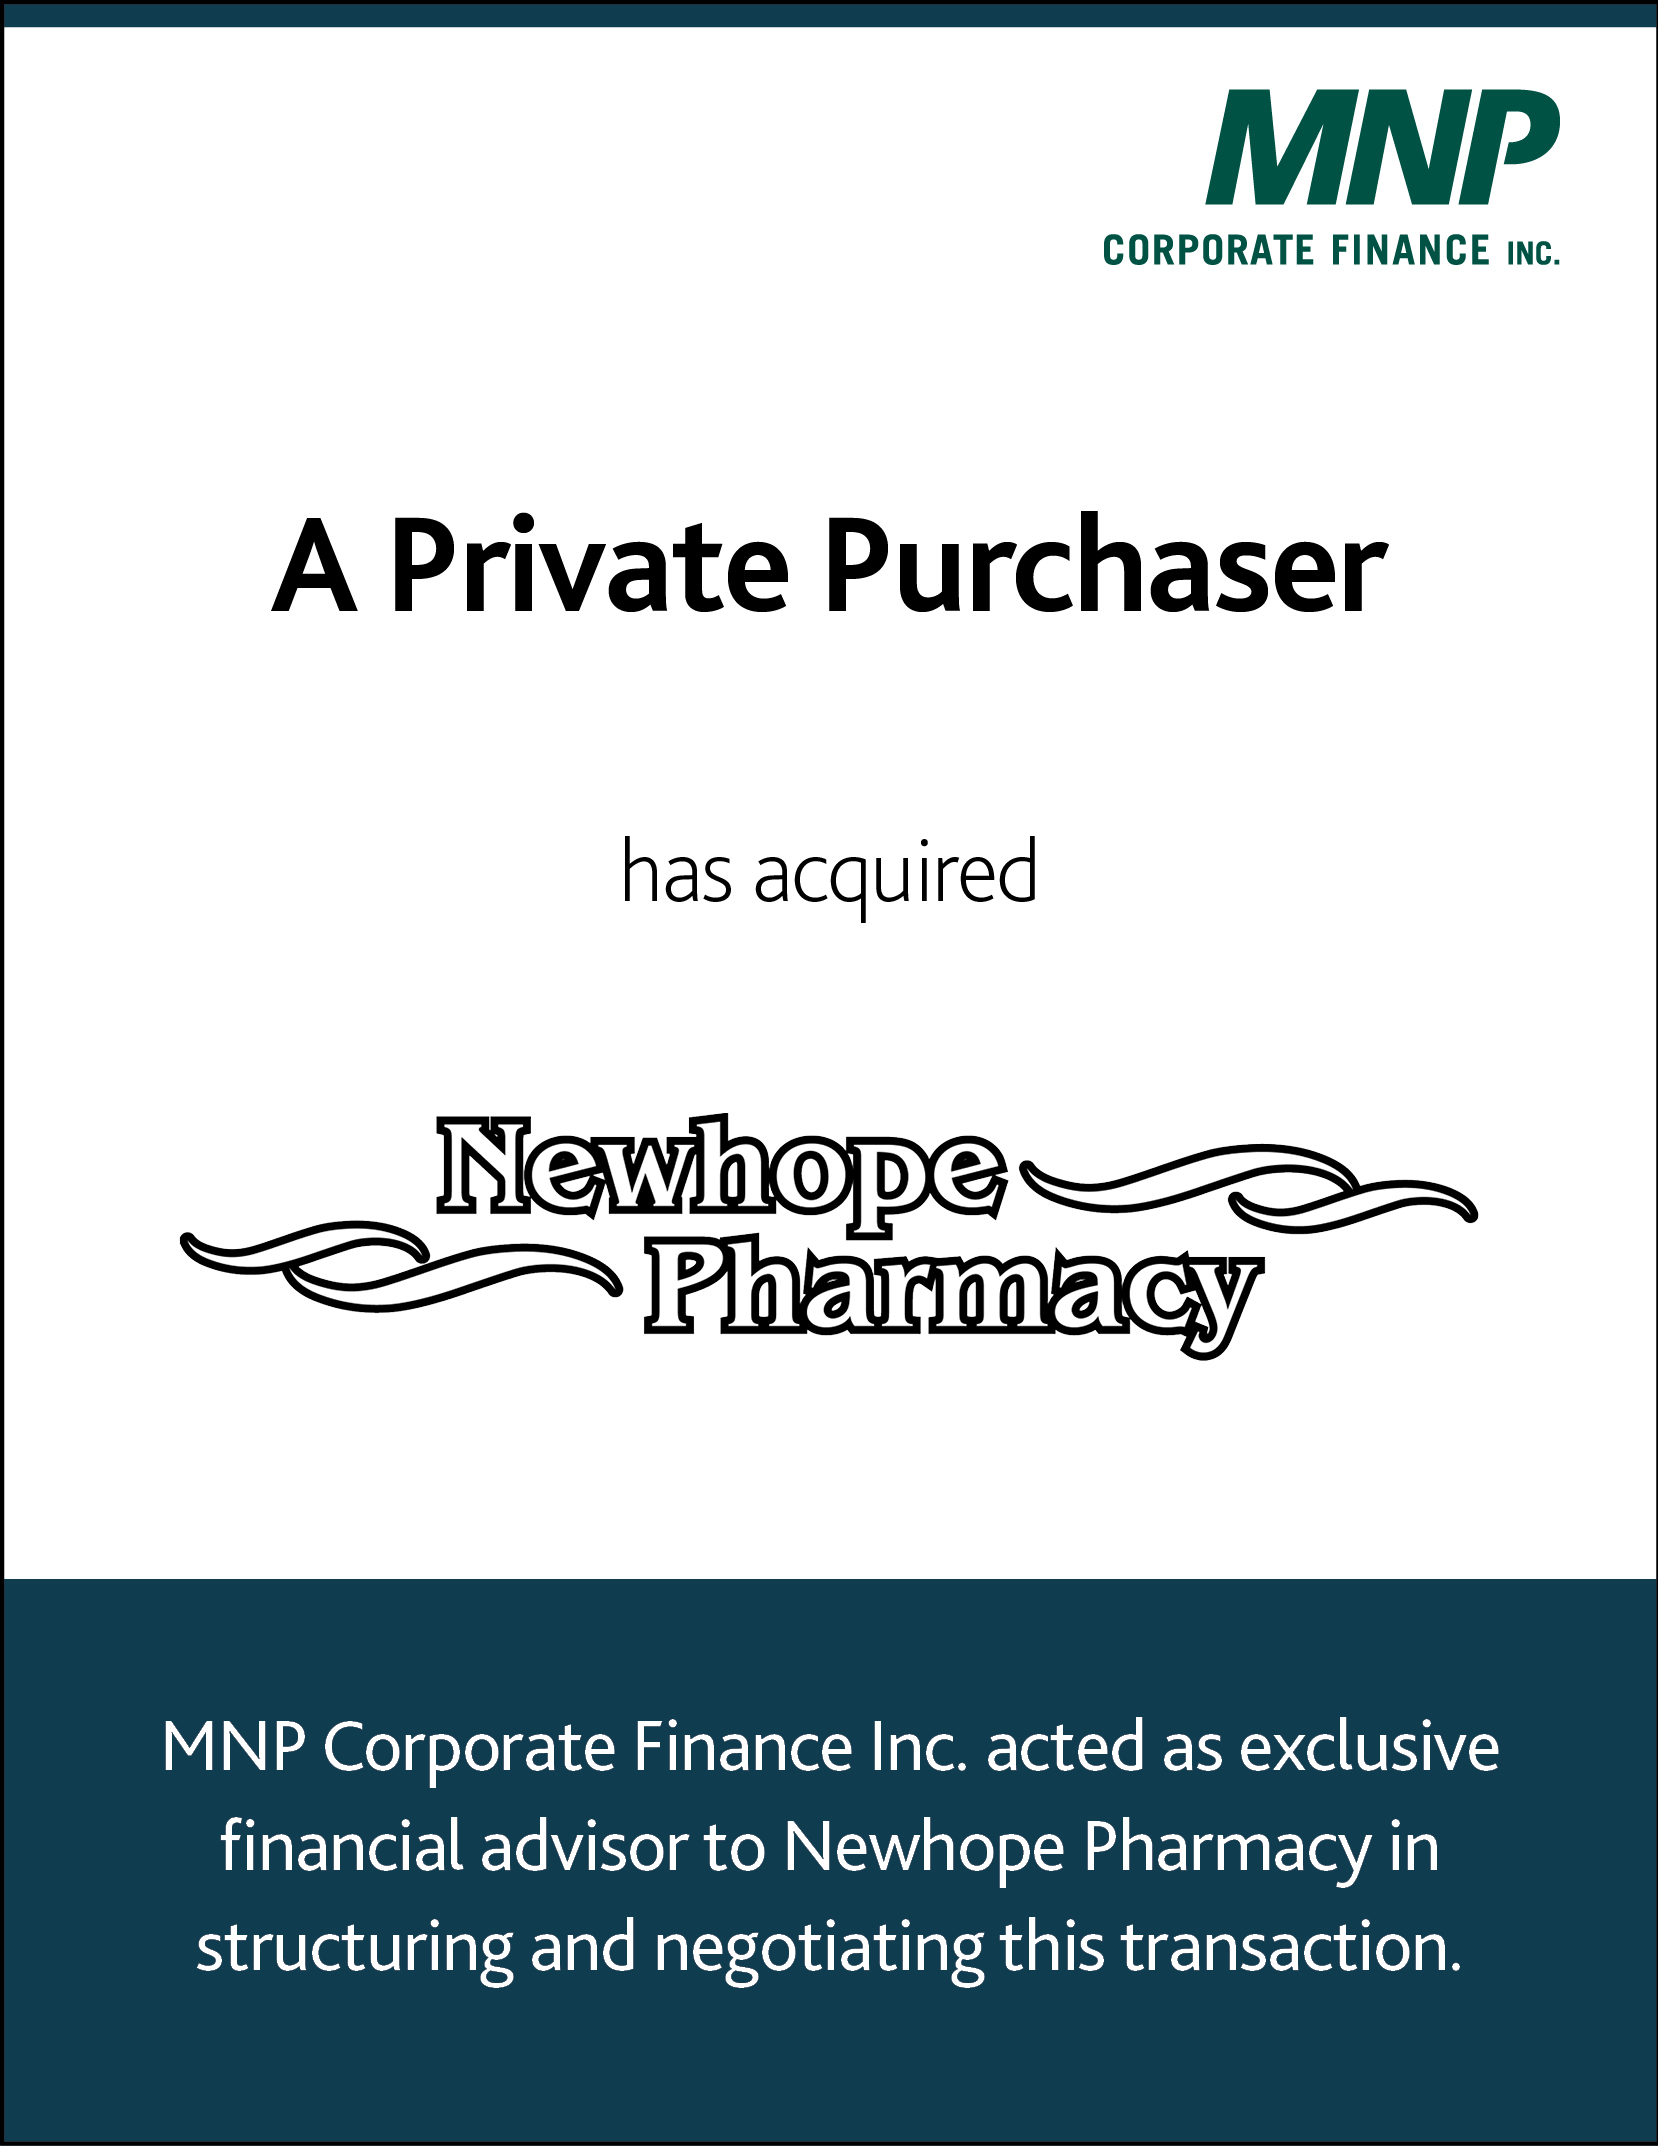 A private purchaser has acquired Newhope Pharmacy